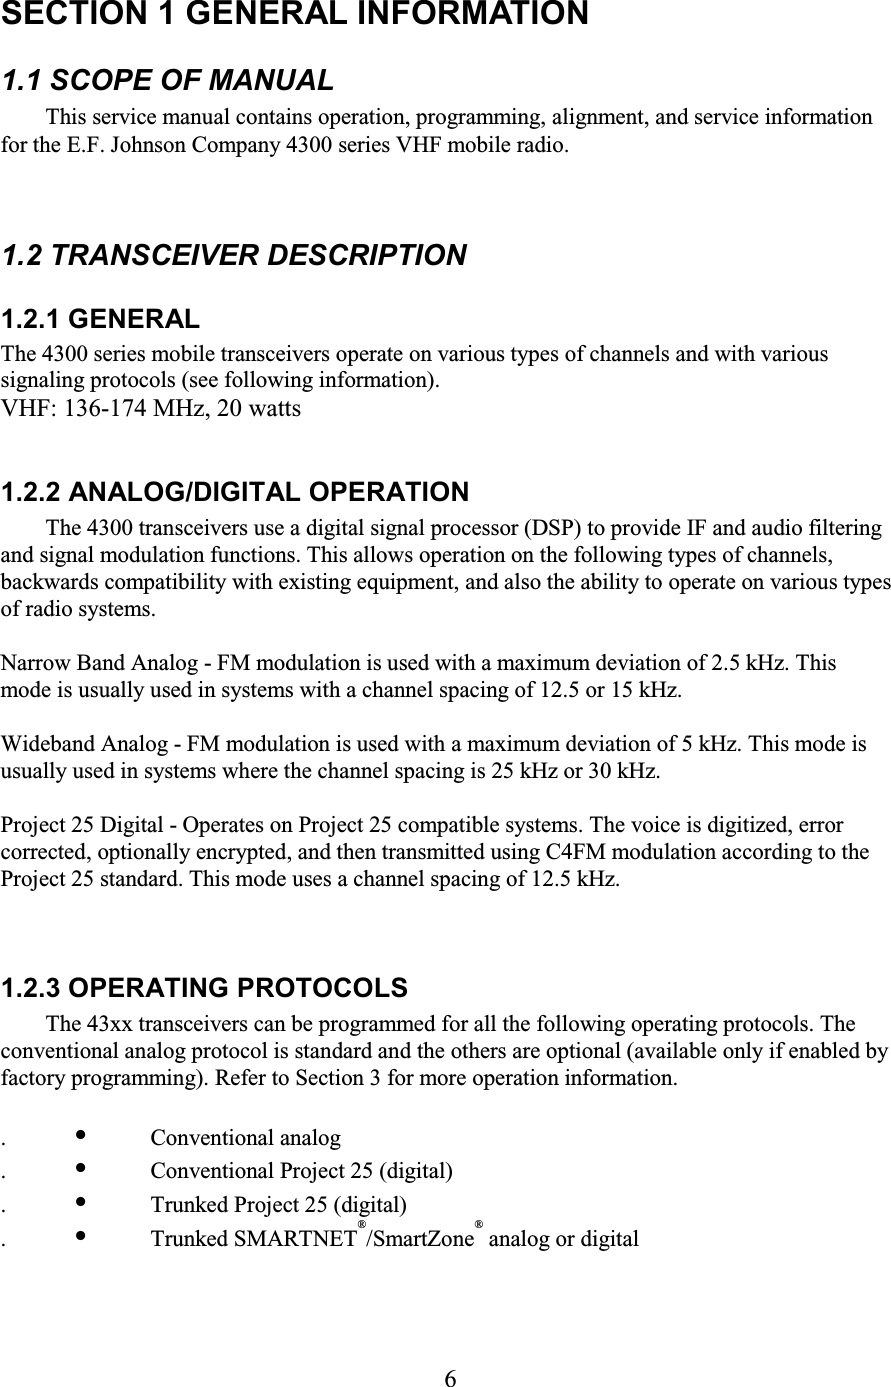 6 SECTION 1 GENERAL INFORMATION  1.1 SCOPE OF MANUAL  This service manual contains operation, programming, alignment, and service information for the E.F. Johnson Company 4300 series VHF mobile radio. 1.2 TRANSCEIVER DESCRIPTION  1.2.1 GENERAL  The 4300 series mobile transceivers operate on various types of channels and with various signaling protocols (see following information).  VHF: 136-174 MHz, 20 watts  1.2.2 ANALOG/DIGITAL OPERATION  The 4300 transceivers use a digital signal processor (DSP) to provide IF and audio filtering and signal modulation functions. This allows operation on the following types of channels, backwards compatibility with existing equipment, and also the ability to operate on various types of radio systems.  Narrow Band Analog - FM modulation is used with a maximum deviation of 2.5 kHz. This mode is usually used in systems with a channel spacing of 12.5 or 15 kHz.  Wideband Analog - FM modulation is used with a maximum deviation of 5 kHz. This mode is usually used in systems where the channel spacing is 25 kHz or 30 kHz.  Project 25 Digital - Operates on Project 25 compatible systems. The voice is digitized, error corrected, optionally encrypted, and then transmitted using C4FM modulation according to the Project 25 standard. This mode uses a channel spacing of 12.5 kHz.  1.2.3 OPERATING PROTOCOLS  The 43xx transceivers can be programmed for all the following operating protocols. The conventional analog protocol is standard and the others are optional (available only if enabled by factory programming). Refer to Section 3 for more operation information.  . •  Conventional analog  . •  Conventional Project 25 (digital)  . •  Trunked Project 25 (digital)  . •  Trunked SMARTNET®/SmartZone® analog or digital   